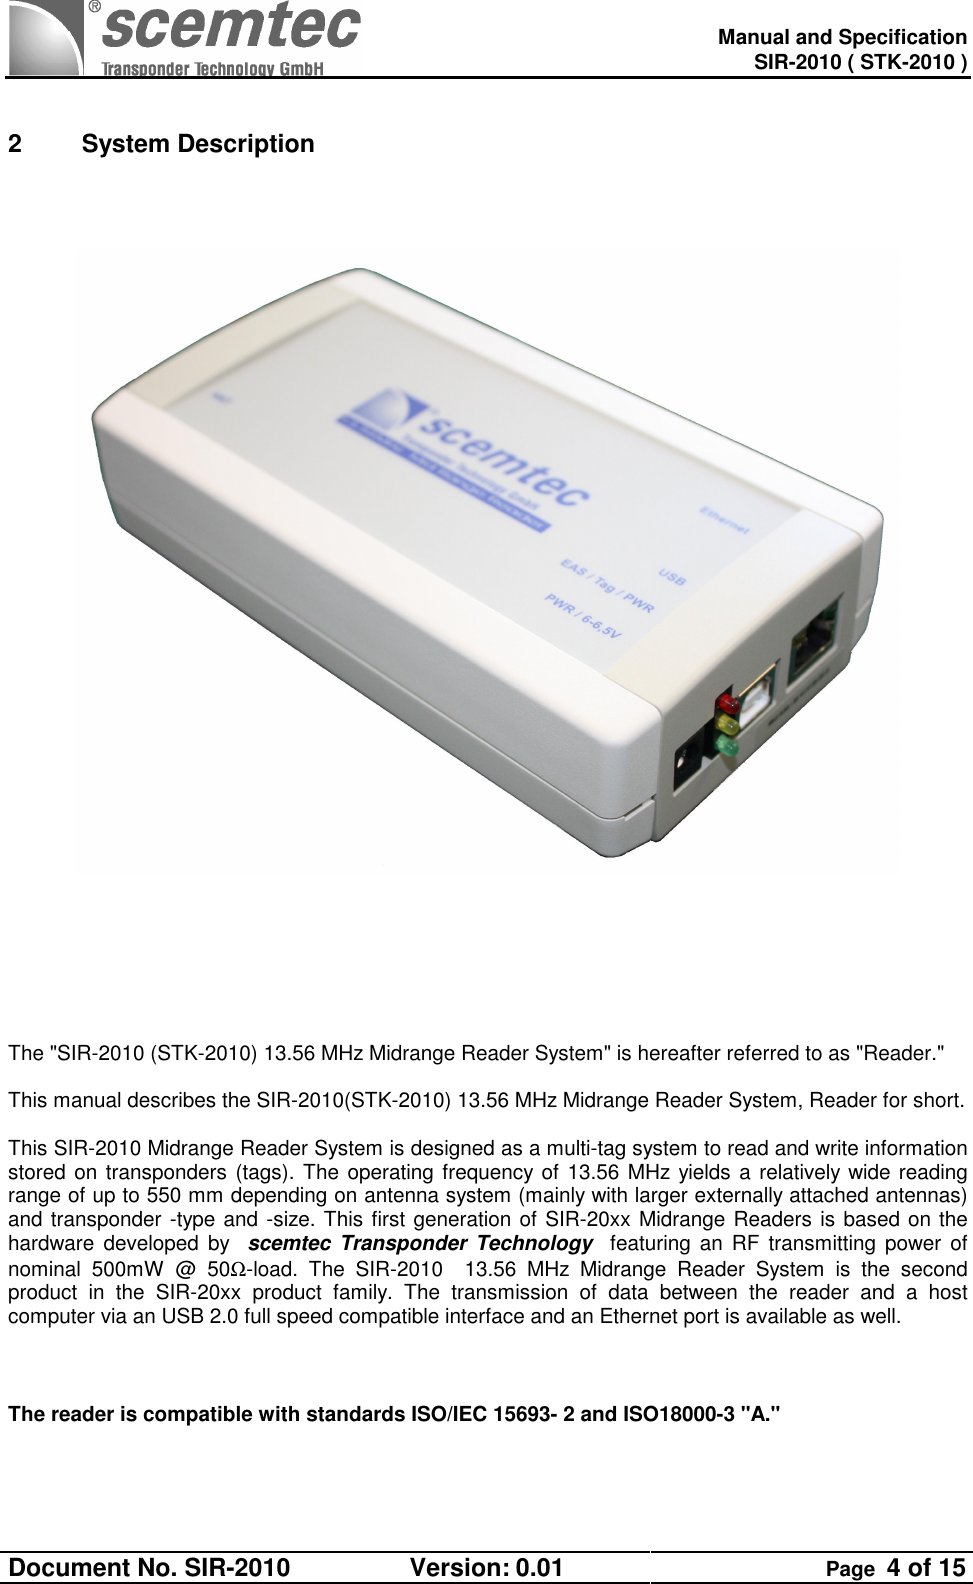   Manual and Specification SIR-2010 ( STK-2010 ) Document No. SIR-2010  Version: 0.01  Page  4 of 15   2  System Description                The &quot;SIR-2010 (STK-2010) 13.56 MHz Midrange Reader System&quot; is hereafter referred to as &quot;Reader.&quot;  This manual describes the SIR-2010(STK-2010) 13.56 MHz Midrange Reader System, Reader for short.  This SIR-2010 Midrange Reader System is designed as a multi-tag system to read and write information stored on transponders (tags). The operating frequency of 13.56 MHz yields a relatively wide reading range of up to 550 mm depending on antenna system (mainly with larger externally attached antennas) and transponder -type and -size. This first generation of SIR-20xx Midrange Readers is based on the hardware developed  by    scemtec  Transponder  Technology    featuring an  RF  transmitting power of nominal  500mW  @  50Ω-load.  The  SIR-2010    13.56  MHz  Midrange  Reader  System  is  the  second product  in  the  SIR-20xx  product  family.  The  transmission  of  data  between  the  reader  and  a  host computer via an USB 2.0 full speed compatible interface and an Ethernet port is available as well.    The reader is compatible with standards ISO/IEC 15693- 2 and ISO18000-3 &quot;A.&quot;  